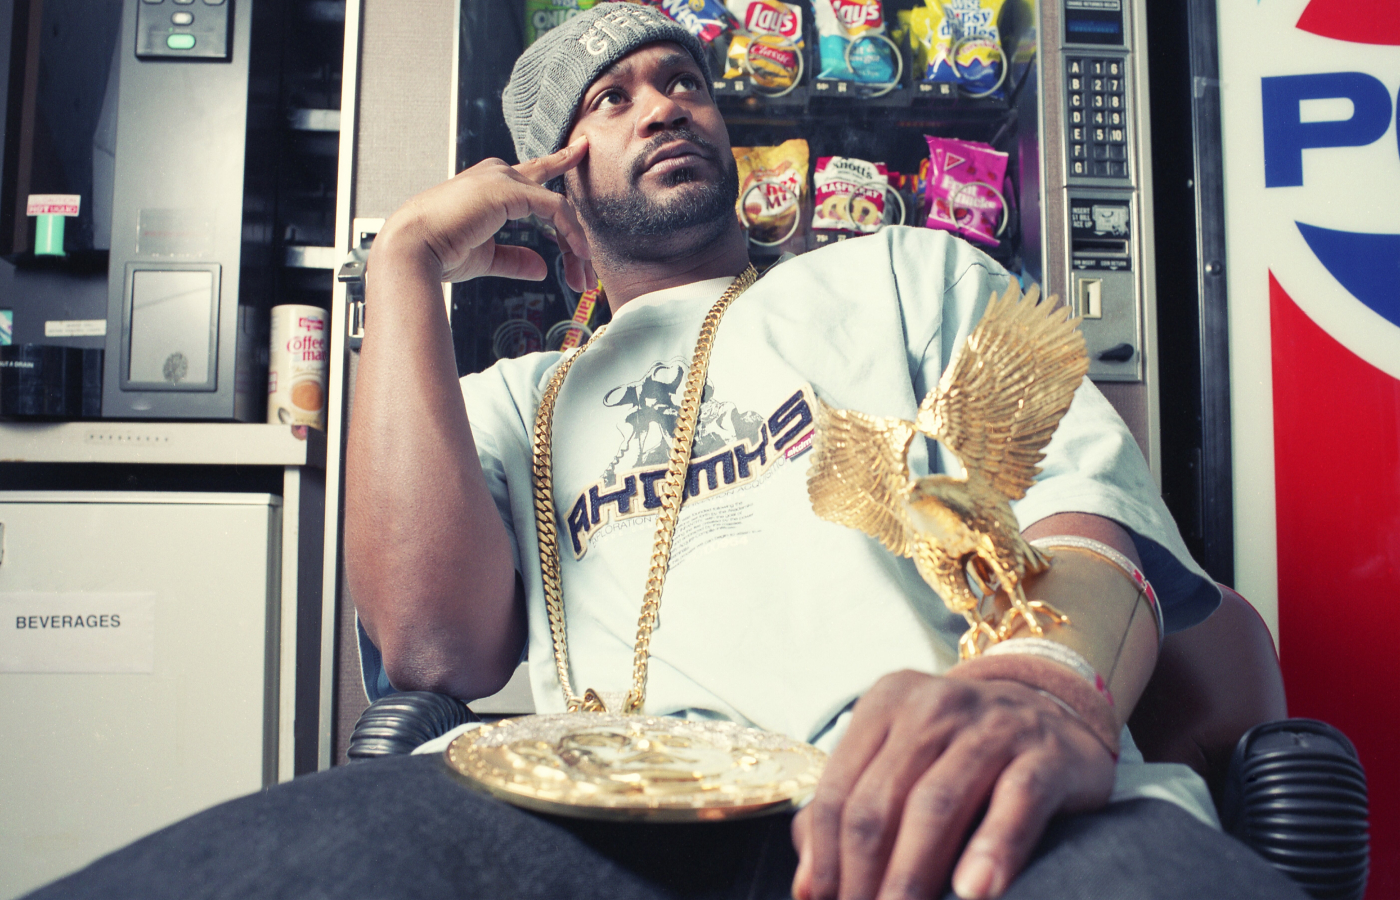 Ghostface Killah wears an incredible medallion pendant and Eagle bracelet, crafted in 14k gold by Jason Arasheben in the 1990s, which features in Ice Cold: An Exhibition of Hip-Hop Jewelry at the American Museum of Natural History. Credit Atsuko Tanaka